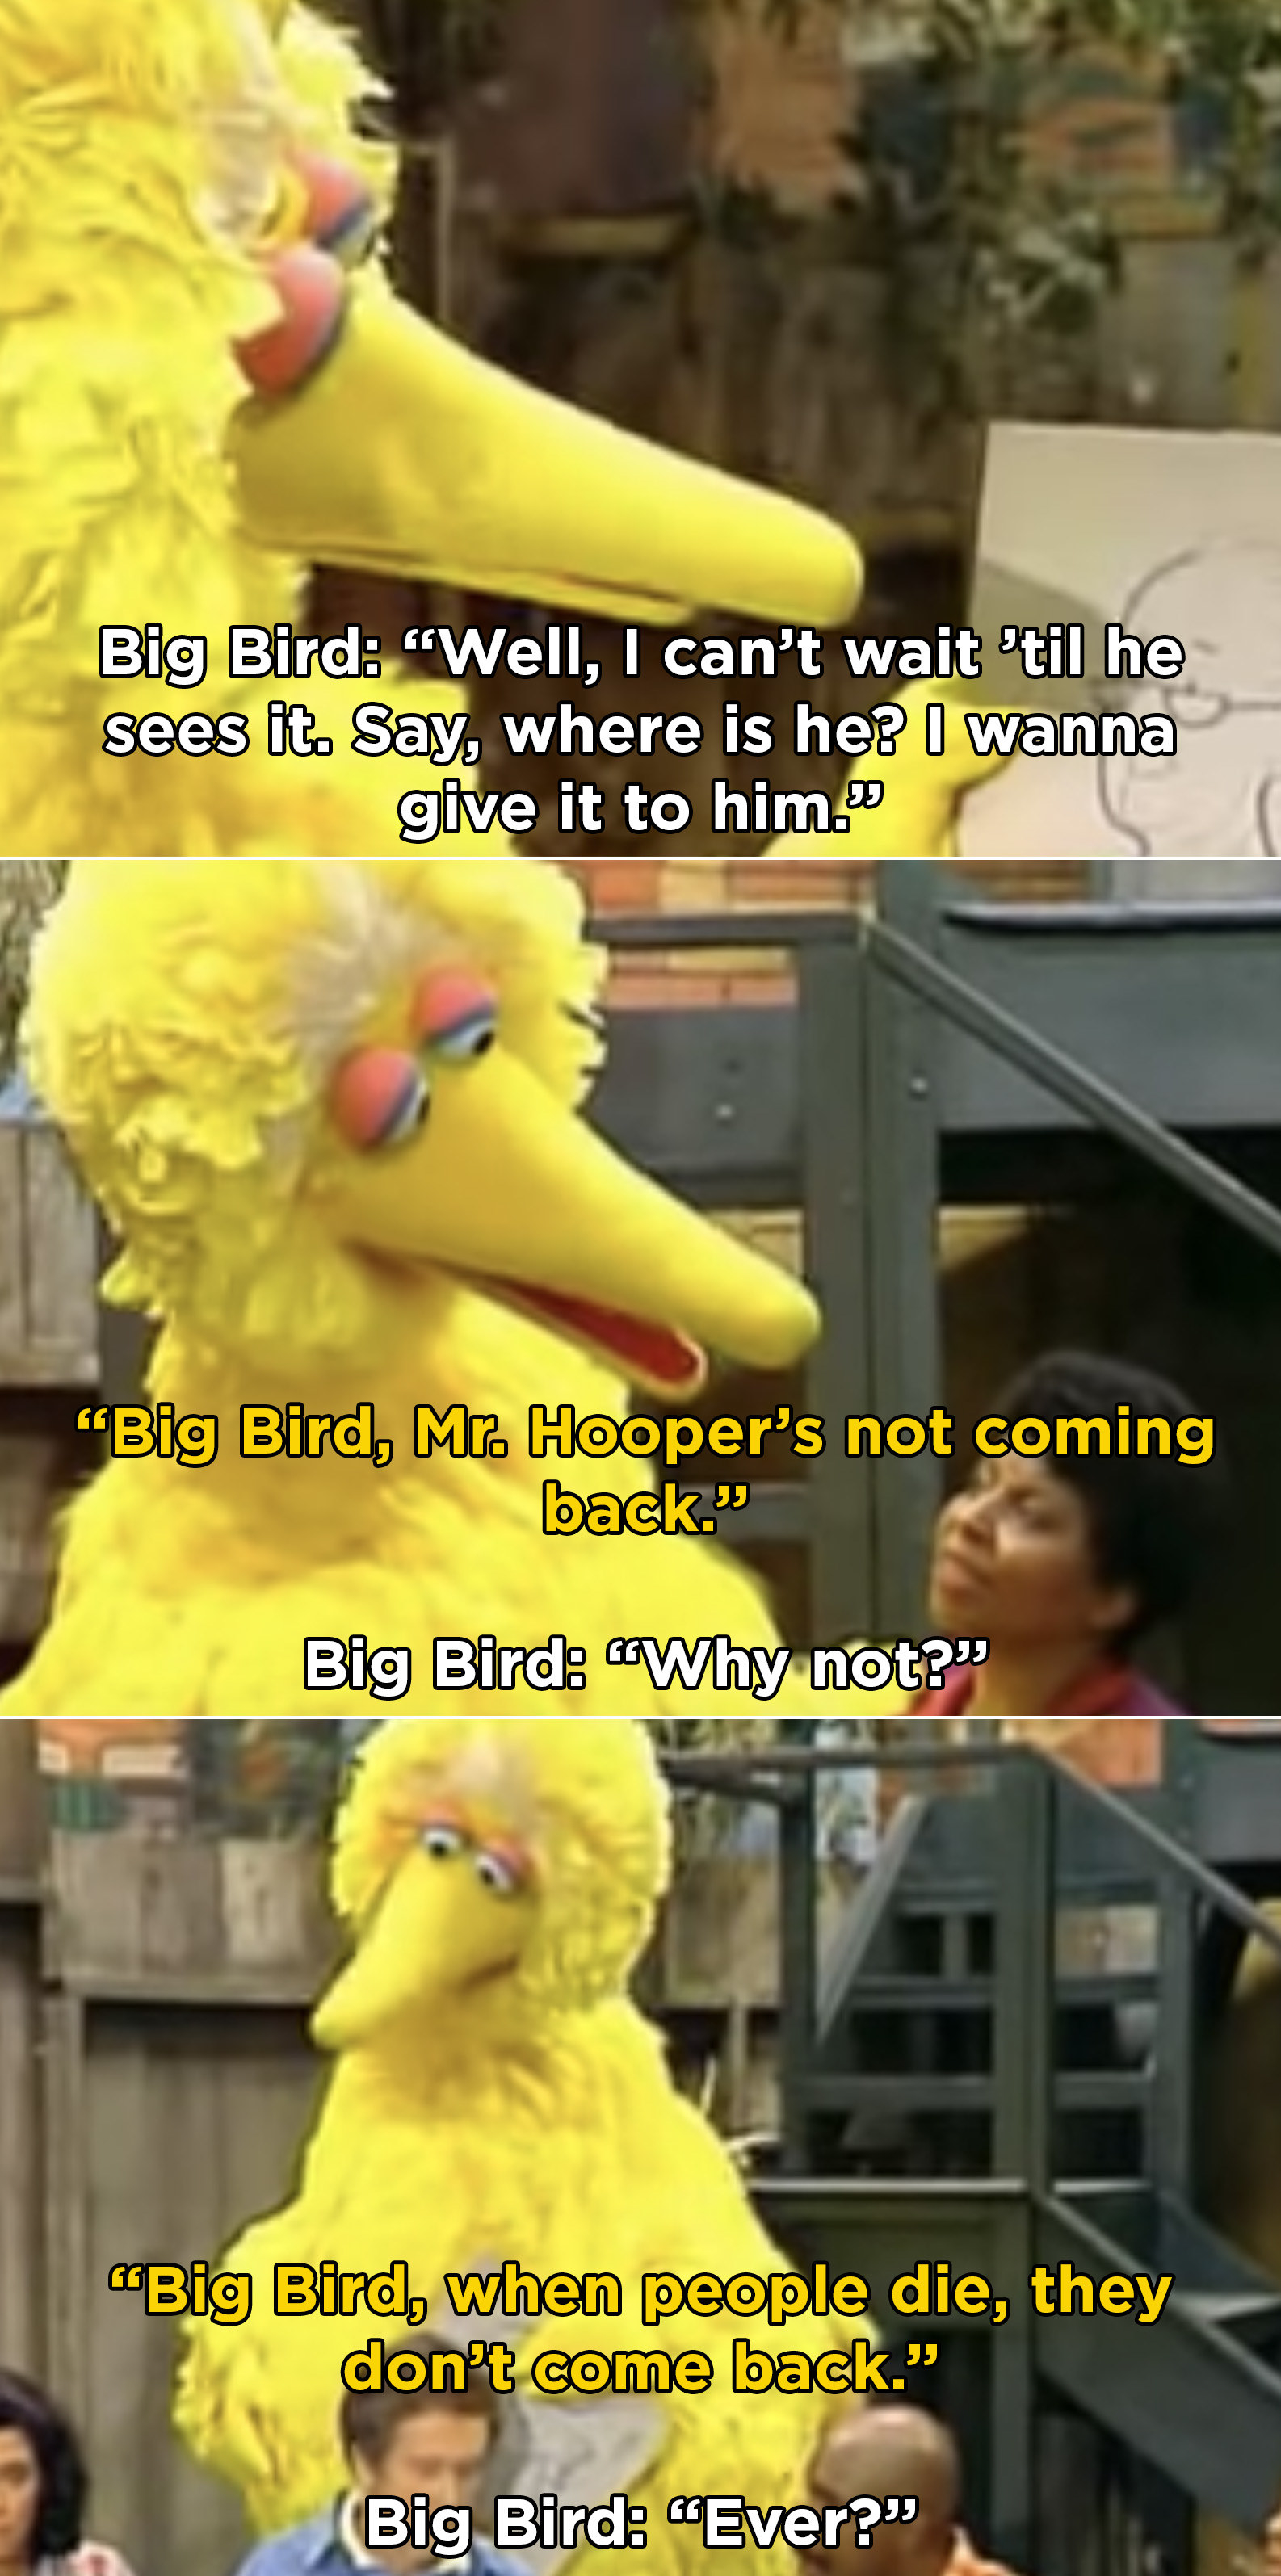 Someone telling Big Bird that Mr. Hooper is not coming back and Big Bird asking, &quot;Why not?&quot;